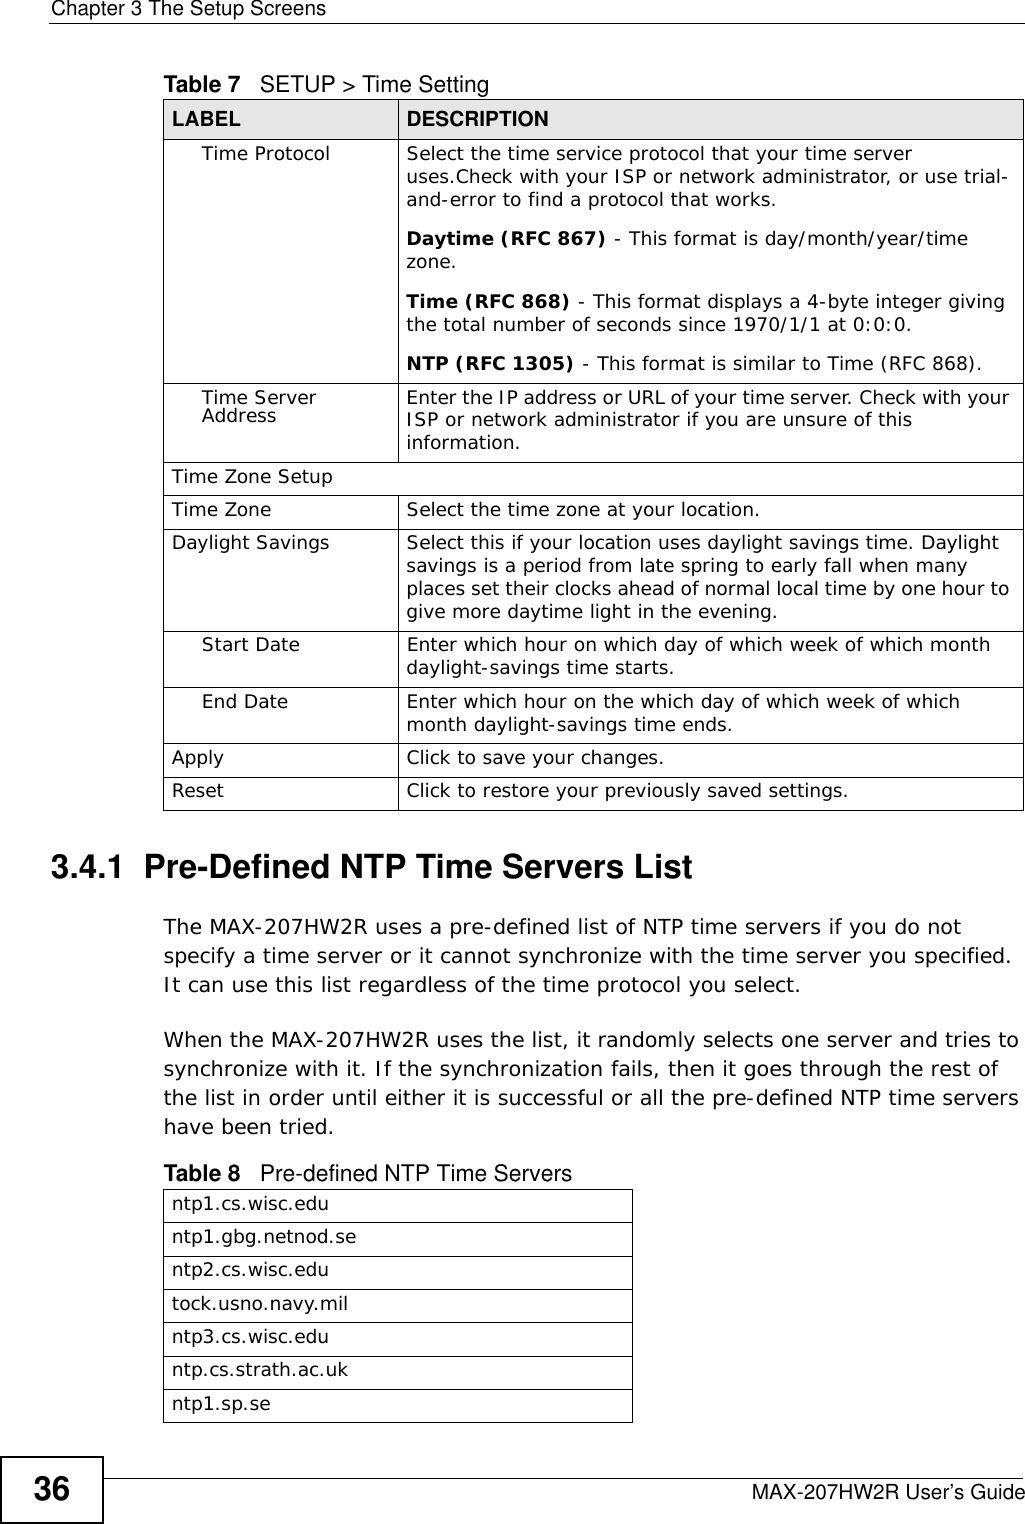 Chapter 3 The Setup ScreensMAX-207HW2R User’s Guide363.4.1  Pre-Defined NTP Time Servers ListThe MAX-207HW2R uses a pre-defined list of NTP time servers if you do not specify a time server or it cannot synchronize with the time server you specified. It can use this list regardless of the time protocol you select.When the MAX-207HW2R uses the list, it randomly selects one server and tries to synchronize with it. If the synchronization fails, then it goes through the rest of the list in order until either it is successful or all the pre-defined NTP time servers have been tried. Time Protocol Select the time service protocol that your time server uses.Check with your ISP or network administrator, or use trial-and-error to find a protocol that works.Daytime (RFC 867) - This format is day/month/year/time zone.Time (RFC 868) - This format displays a 4-byte integer giving the total number of seconds since 1970/1/1 at 0:0:0.NTP (RFC 1305) - This format is similar to Time (RFC 868).Time Server Address Enter the IP address or URL of your time server. Check with your ISP or network administrator if you are unsure of this information.Time Zone SetupTime Zone Select the time zone at your location.Daylight Savings Select this if your location uses daylight savings time. Daylight savings is a period from late spring to early fall when many places set their clocks ahead of normal local time by one hour to give more daytime light in the evening.Start Date Enter which hour on which day of which week of which month daylight-savings time starts.End Date Enter which hour on the which day of which week of which month daylight-savings time ends.Apply Click to save your changes.Reset Click to restore your previously saved settings.Table 7   SETUP &gt; Time Setting LABEL DESCRIPTIONTable 8   Pre-defined NTP Time Serversntp1.cs.wisc.eduntp1.gbg.netnod.sentp2.cs.wisc.edutock.usno.navy.milntp3.cs.wisc.eduntp.cs.strath.ac.ukntp1.sp.se